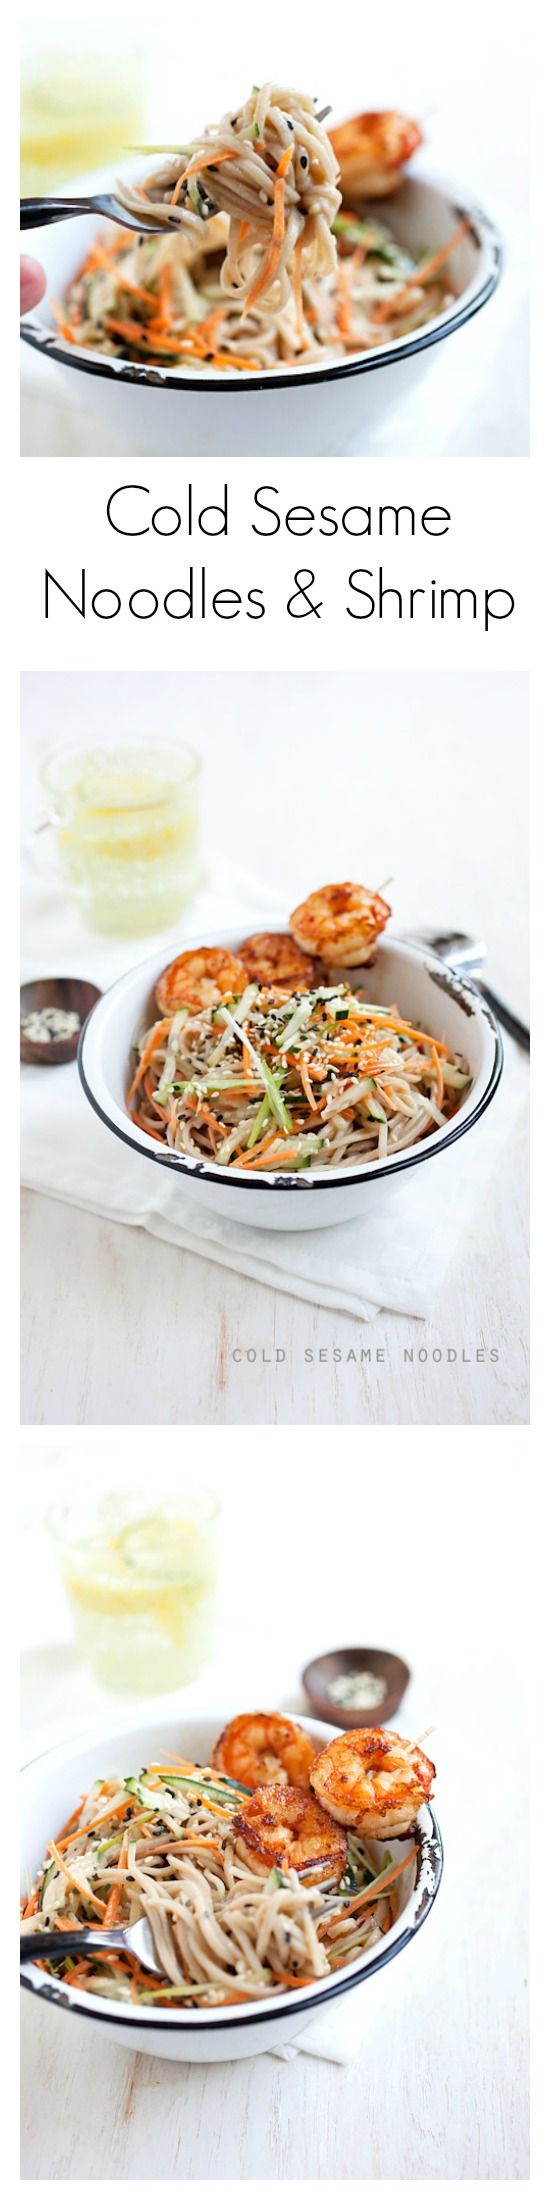 Cold Sesame Noodles & Shrimp. Simply meal that takes only 20 minutes to make. Healthy, refreshing and yummy | rasamalaysia.com